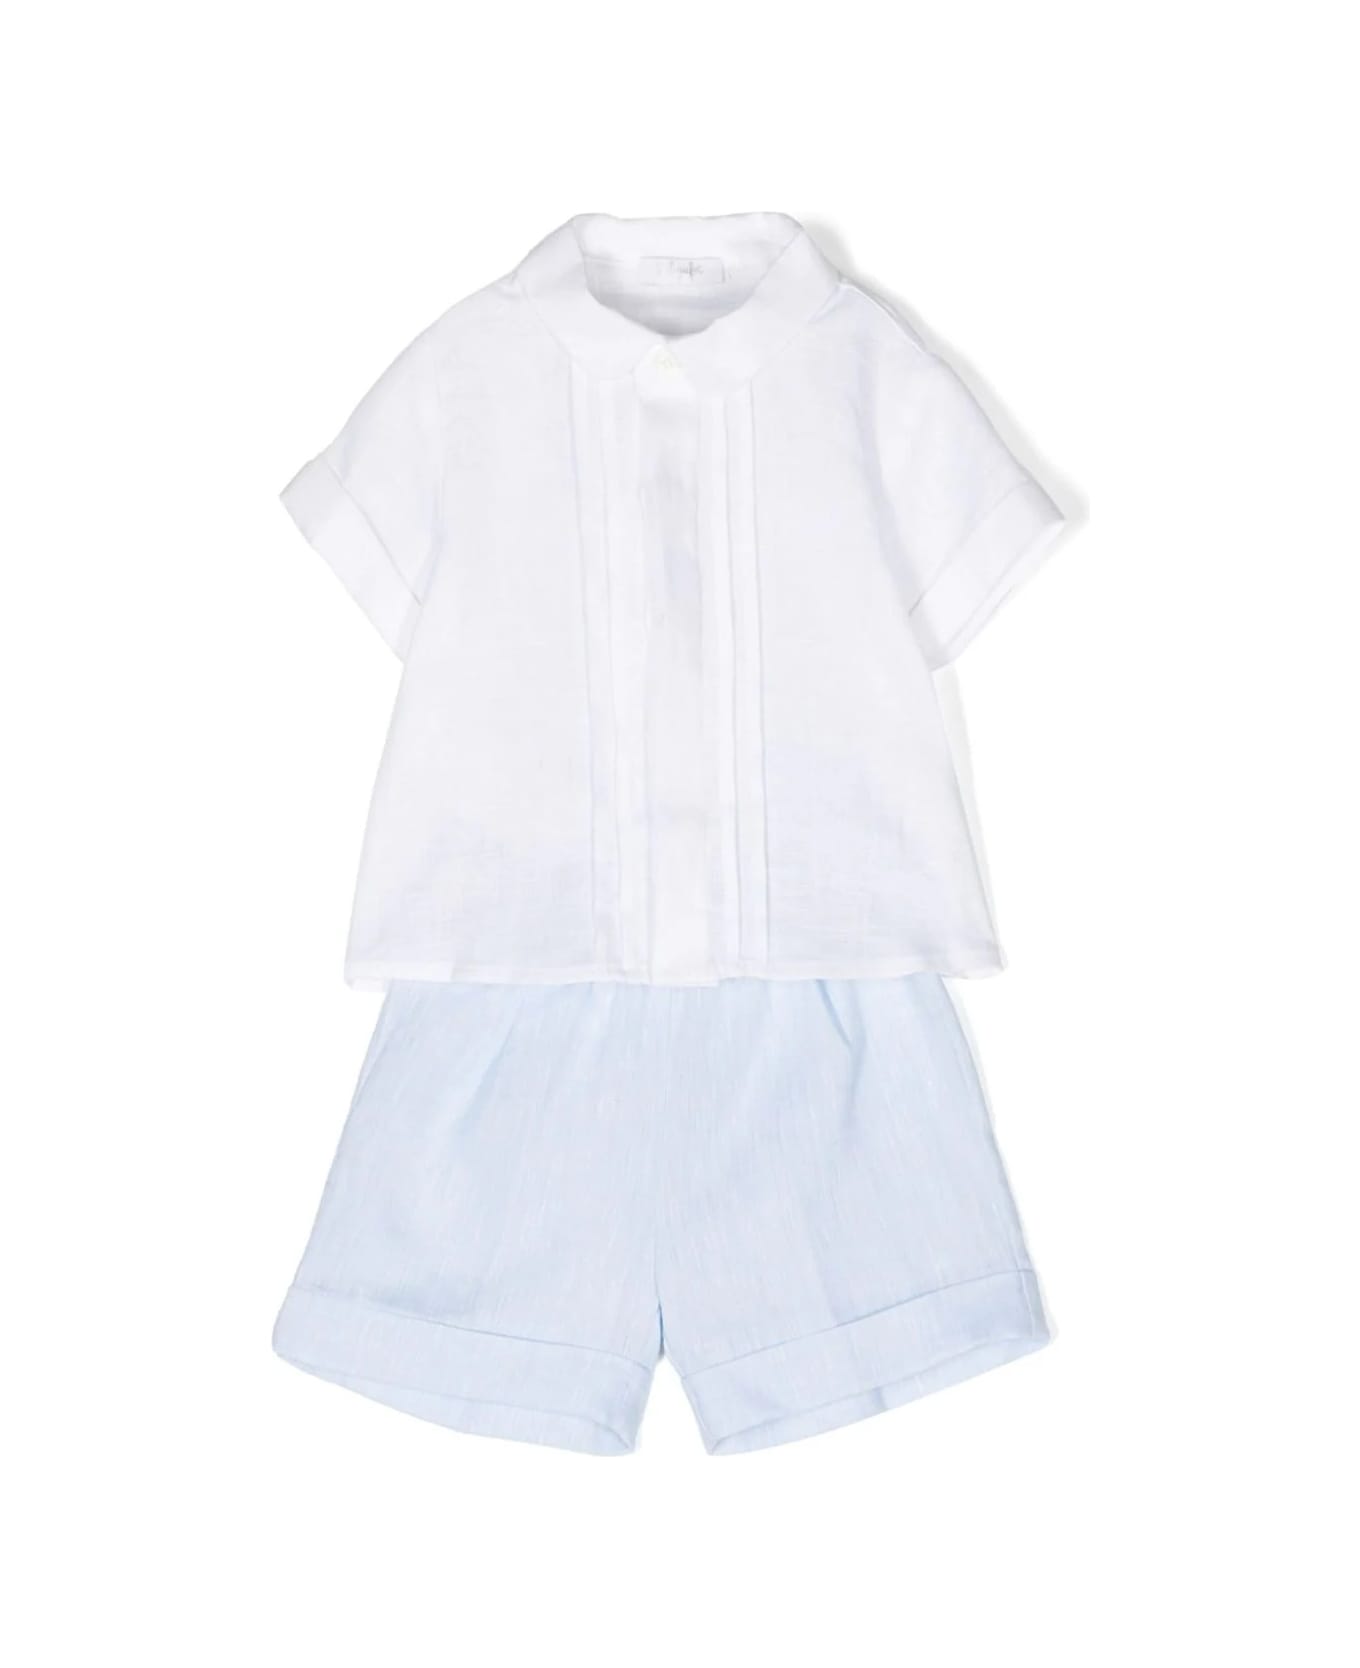 Il Gufo Two Piece Linen Set In White And Light Blue - Blue ボディスーツ＆セットアップ